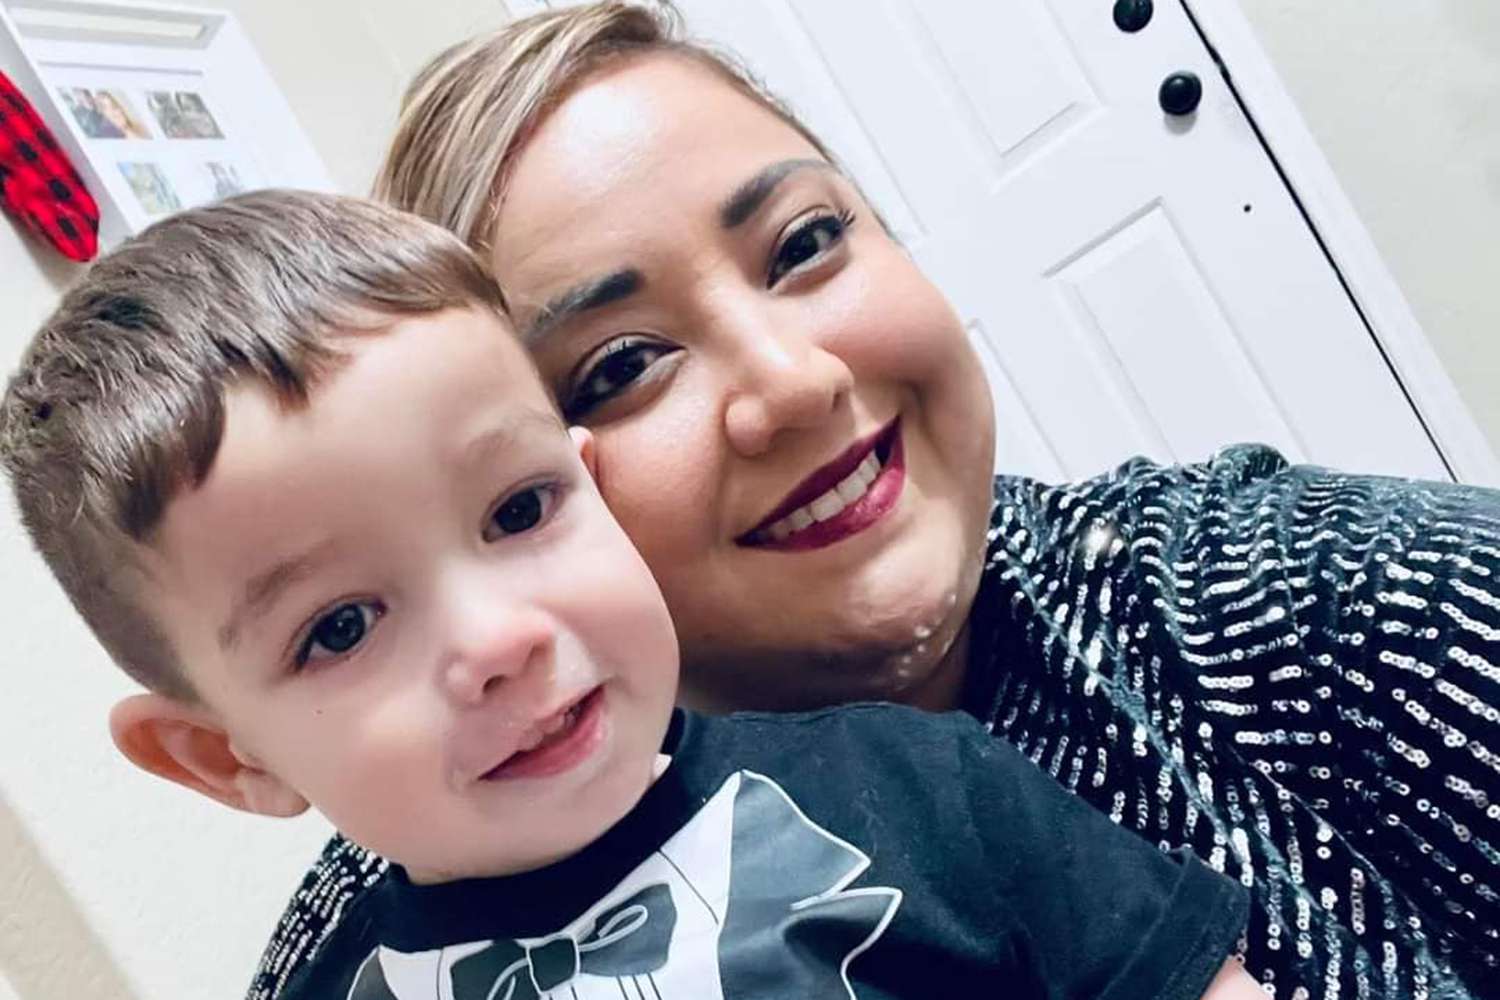 Savannah Kriger, 32, shot her son Kaiden, 3, before ultimately turning a gun on herself in a murder-suicide that happened in San Antonio, Texas in March